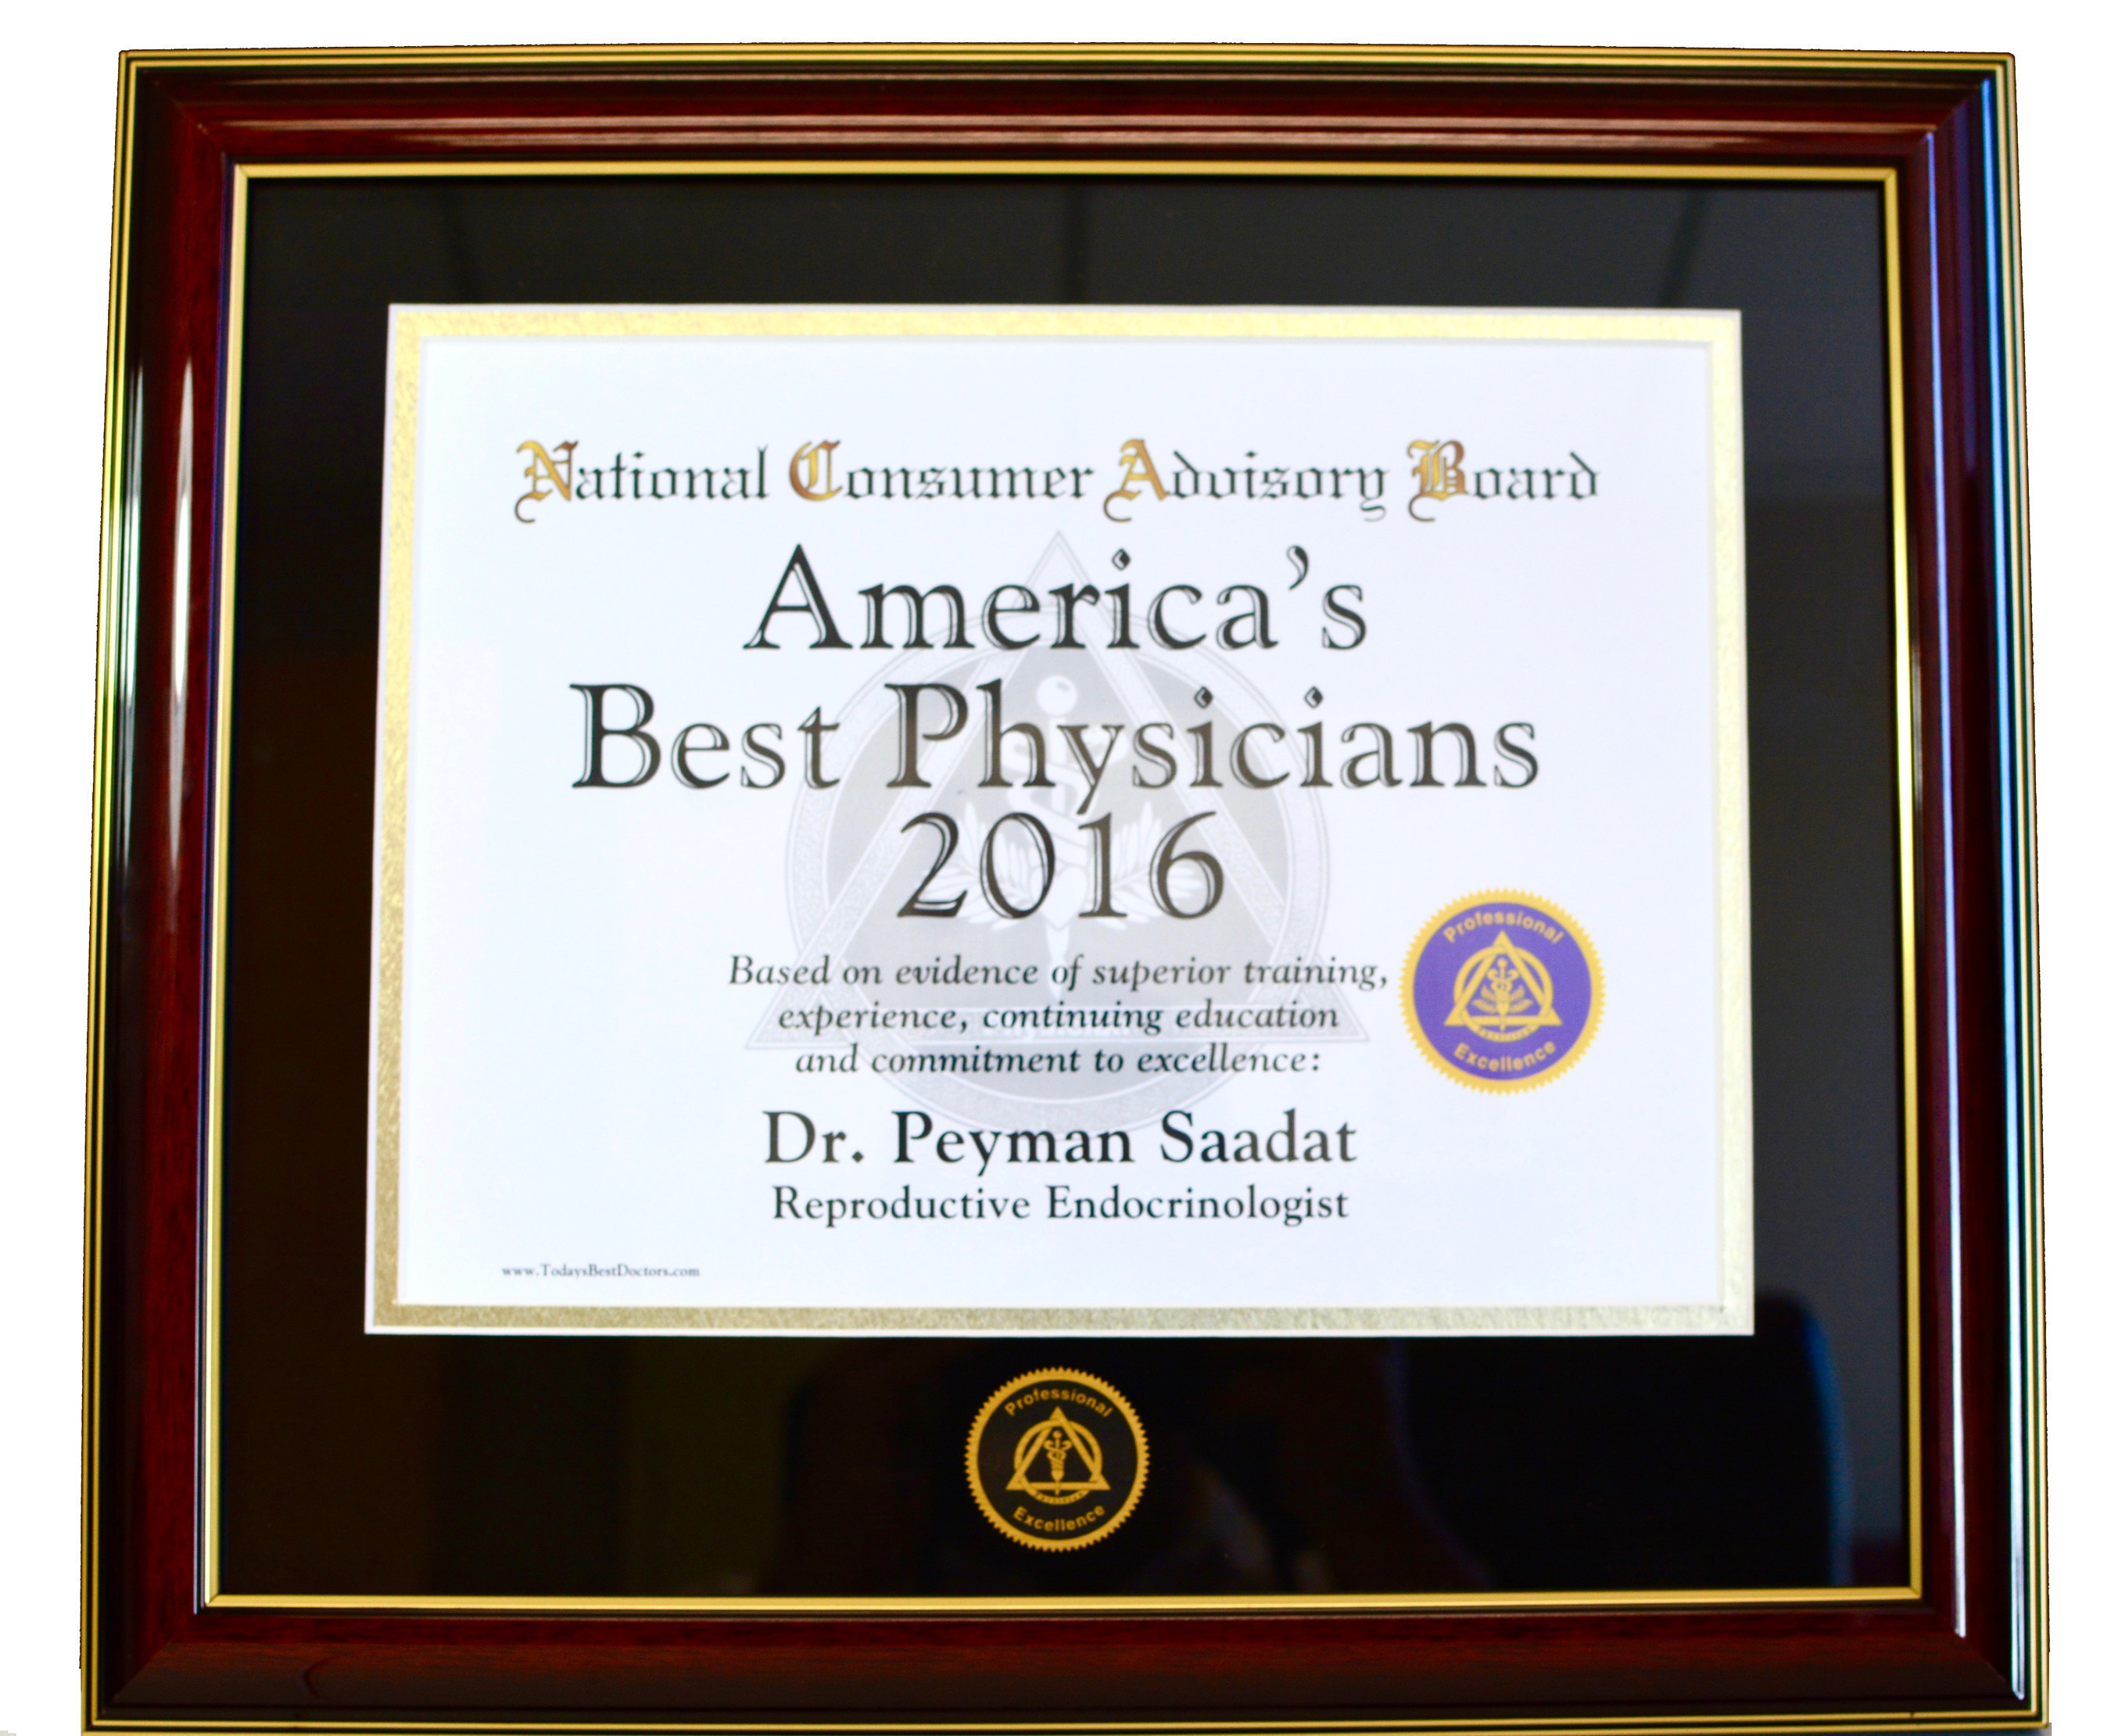 America's Best Physicians 2016